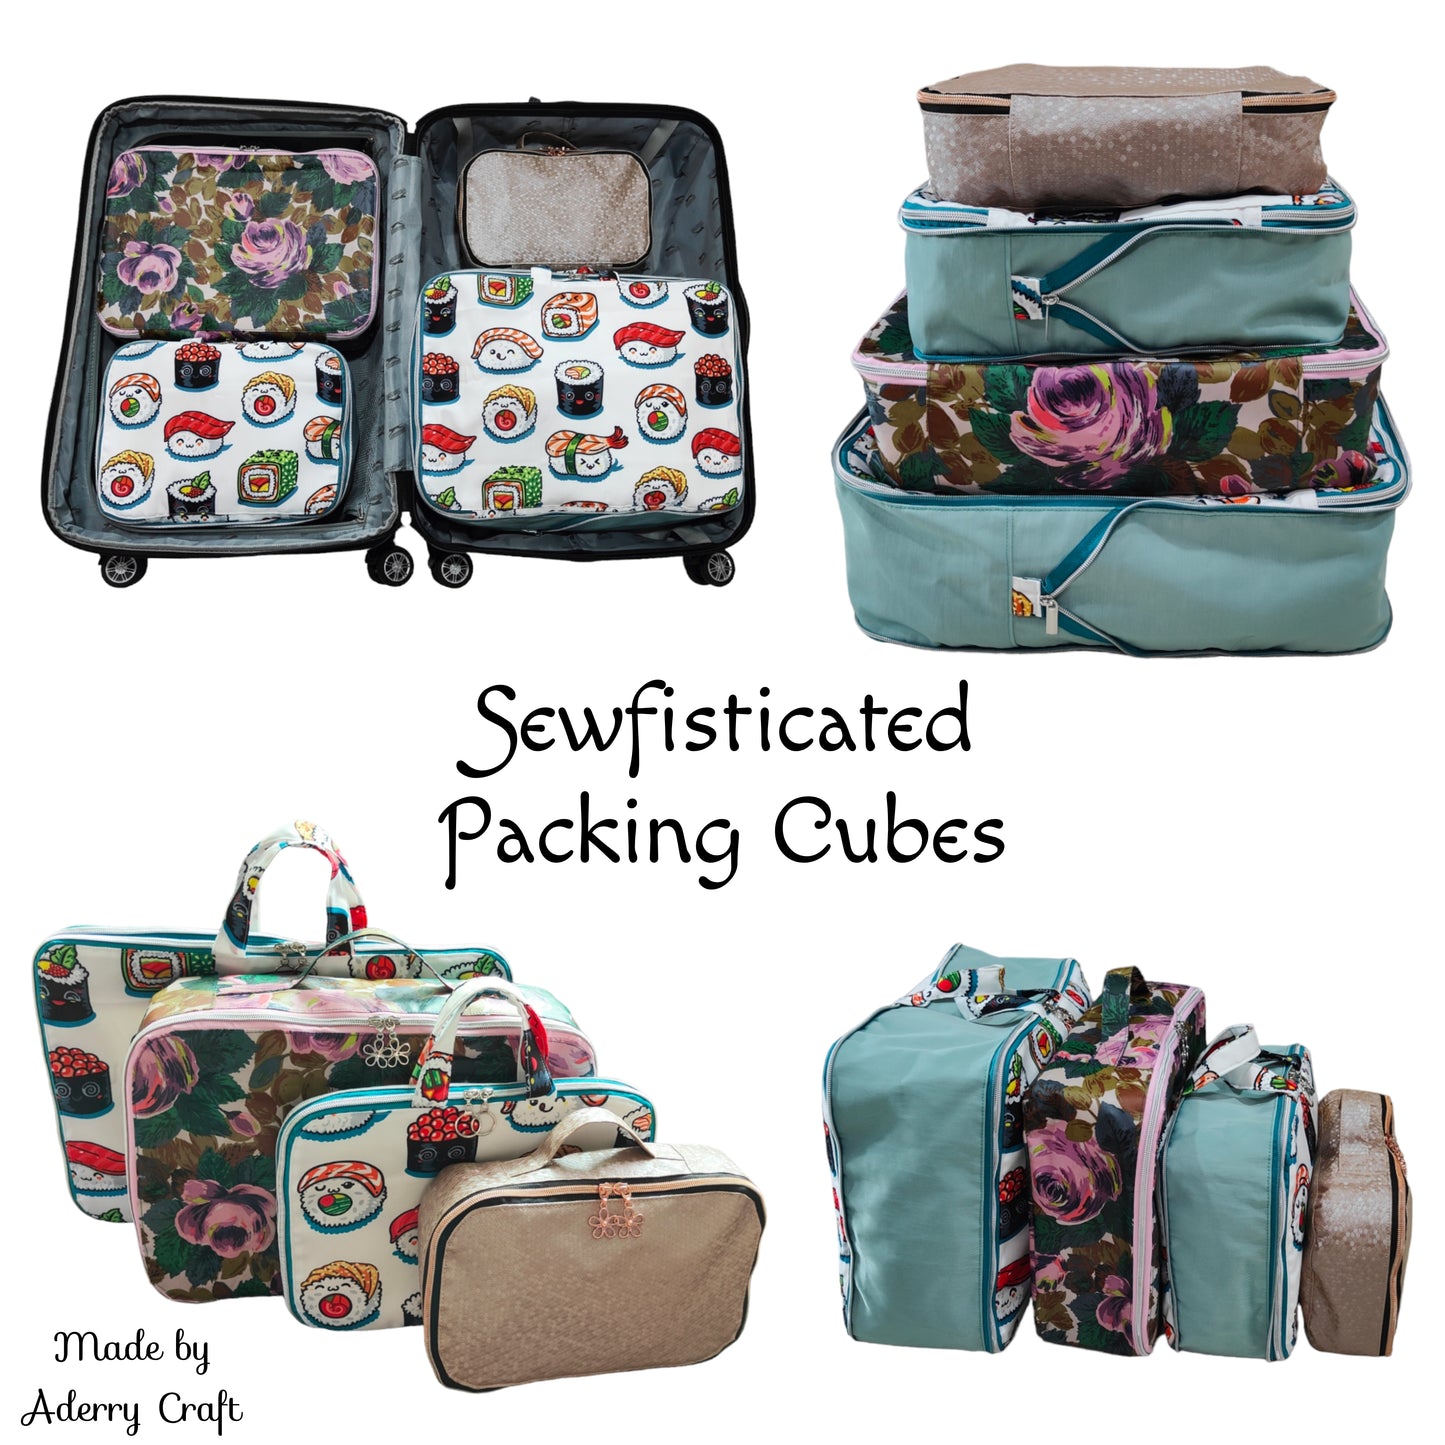 Sewfisticated Packing Cubes